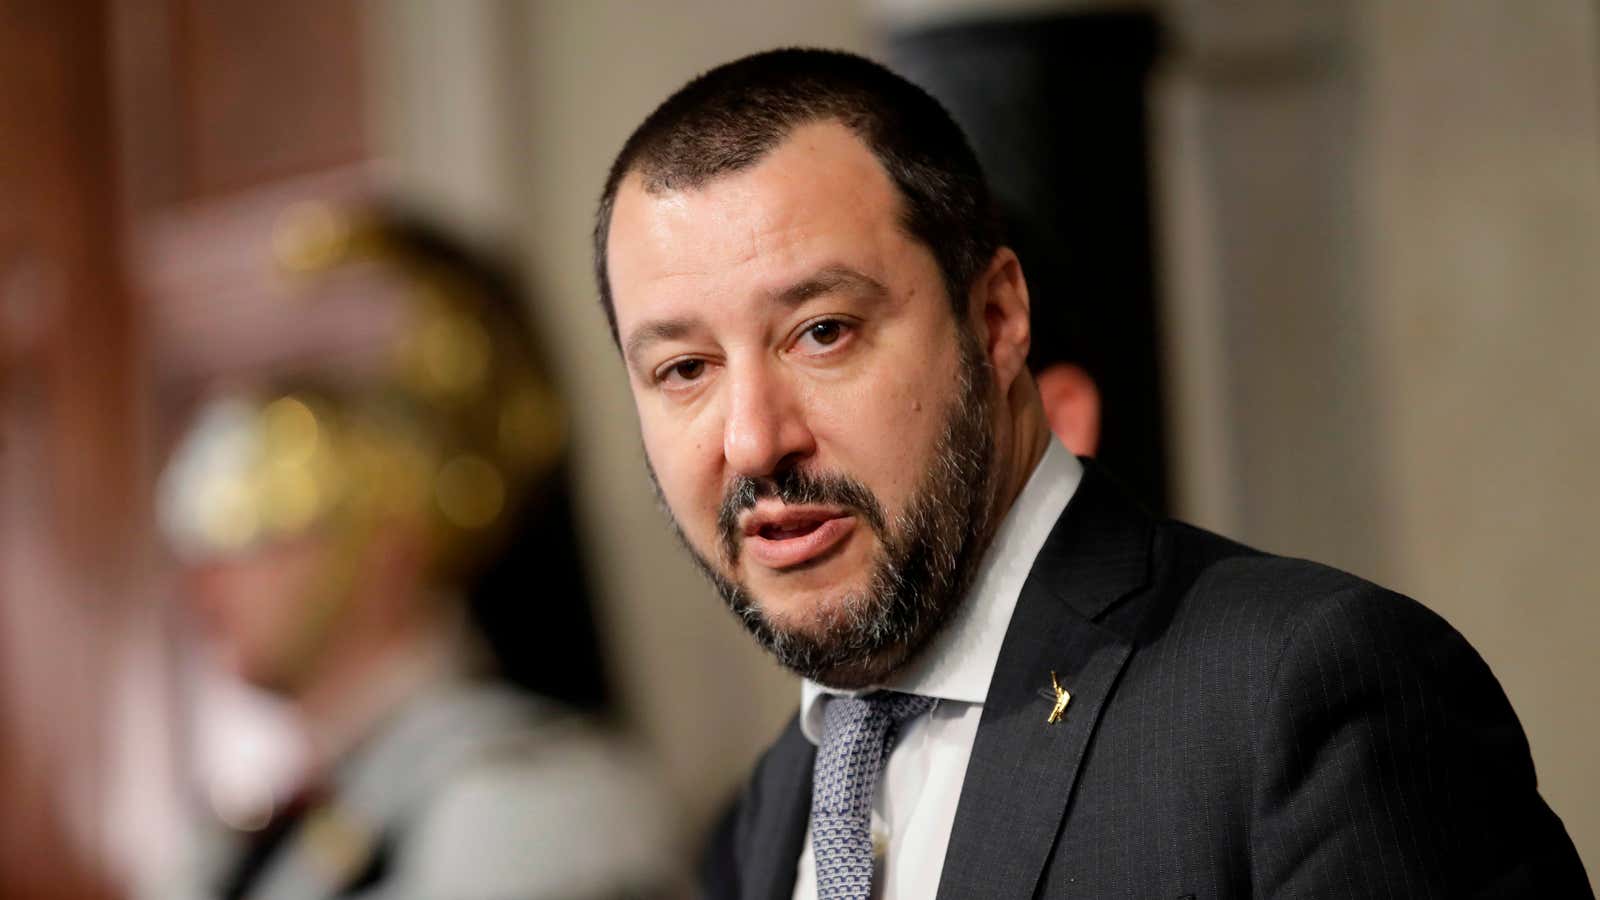 Interior minister Matteo Salvini’s crusade against Roma causes an outcry.